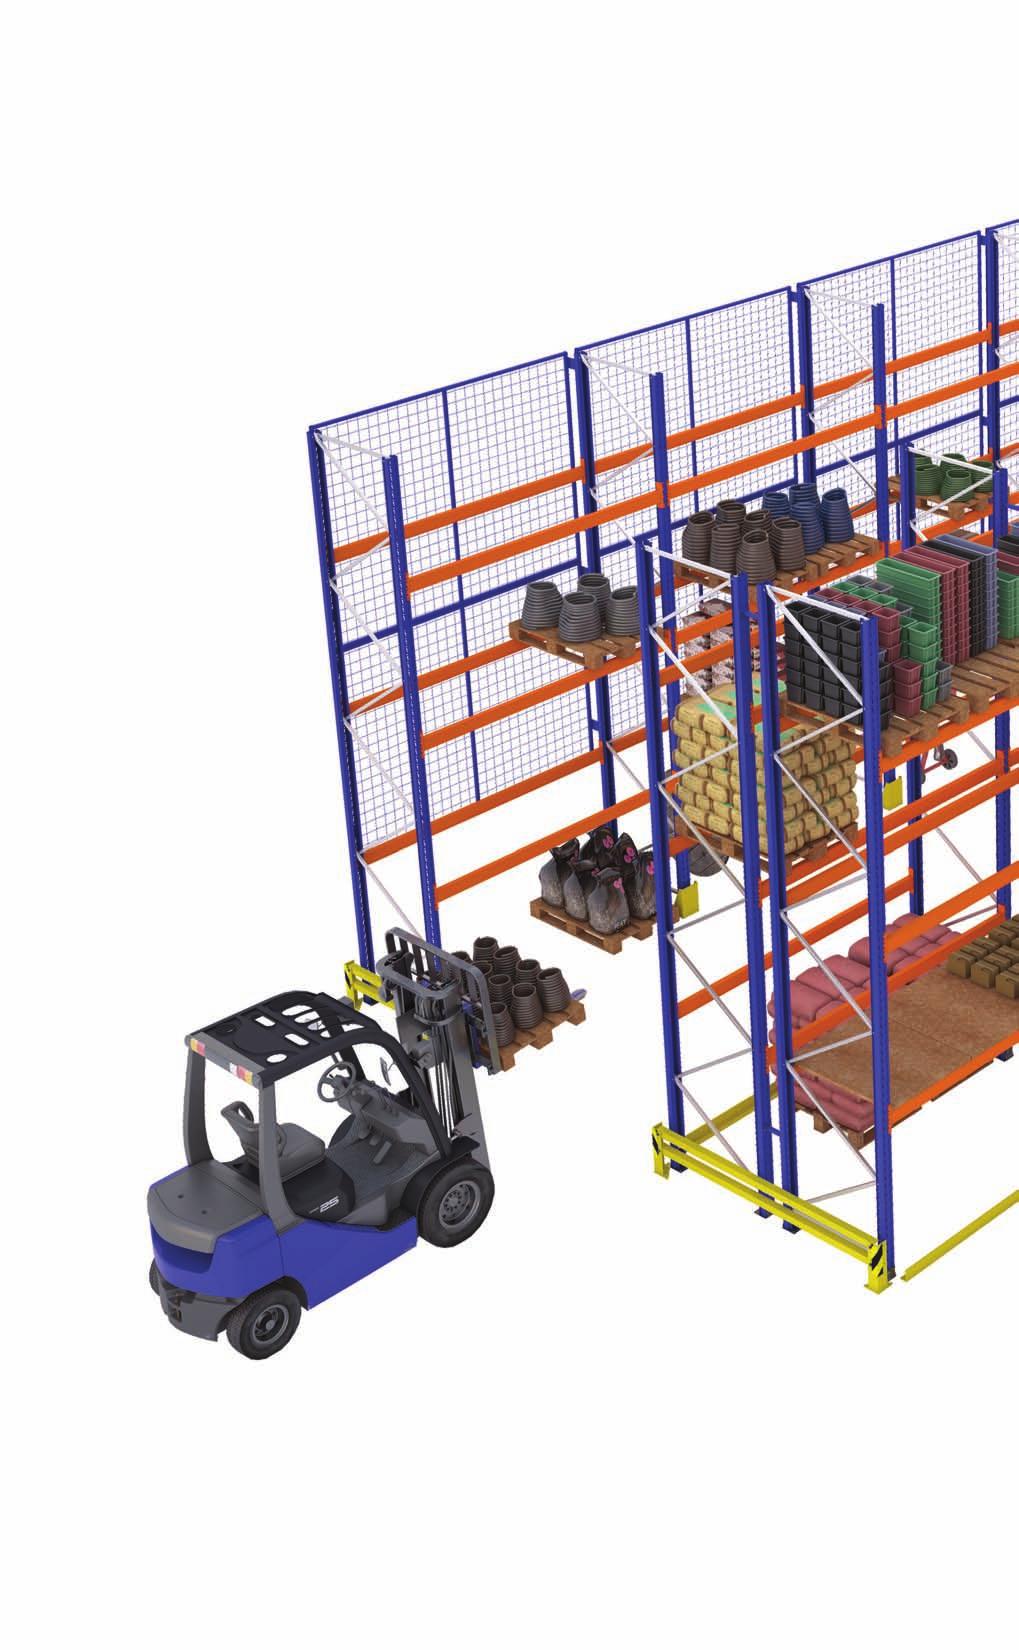 The pallet rack is constructed so that it uses the storage space effectively, increases the capacity of warehouse storage areas, and contributes to the transparent arrangement of the material and